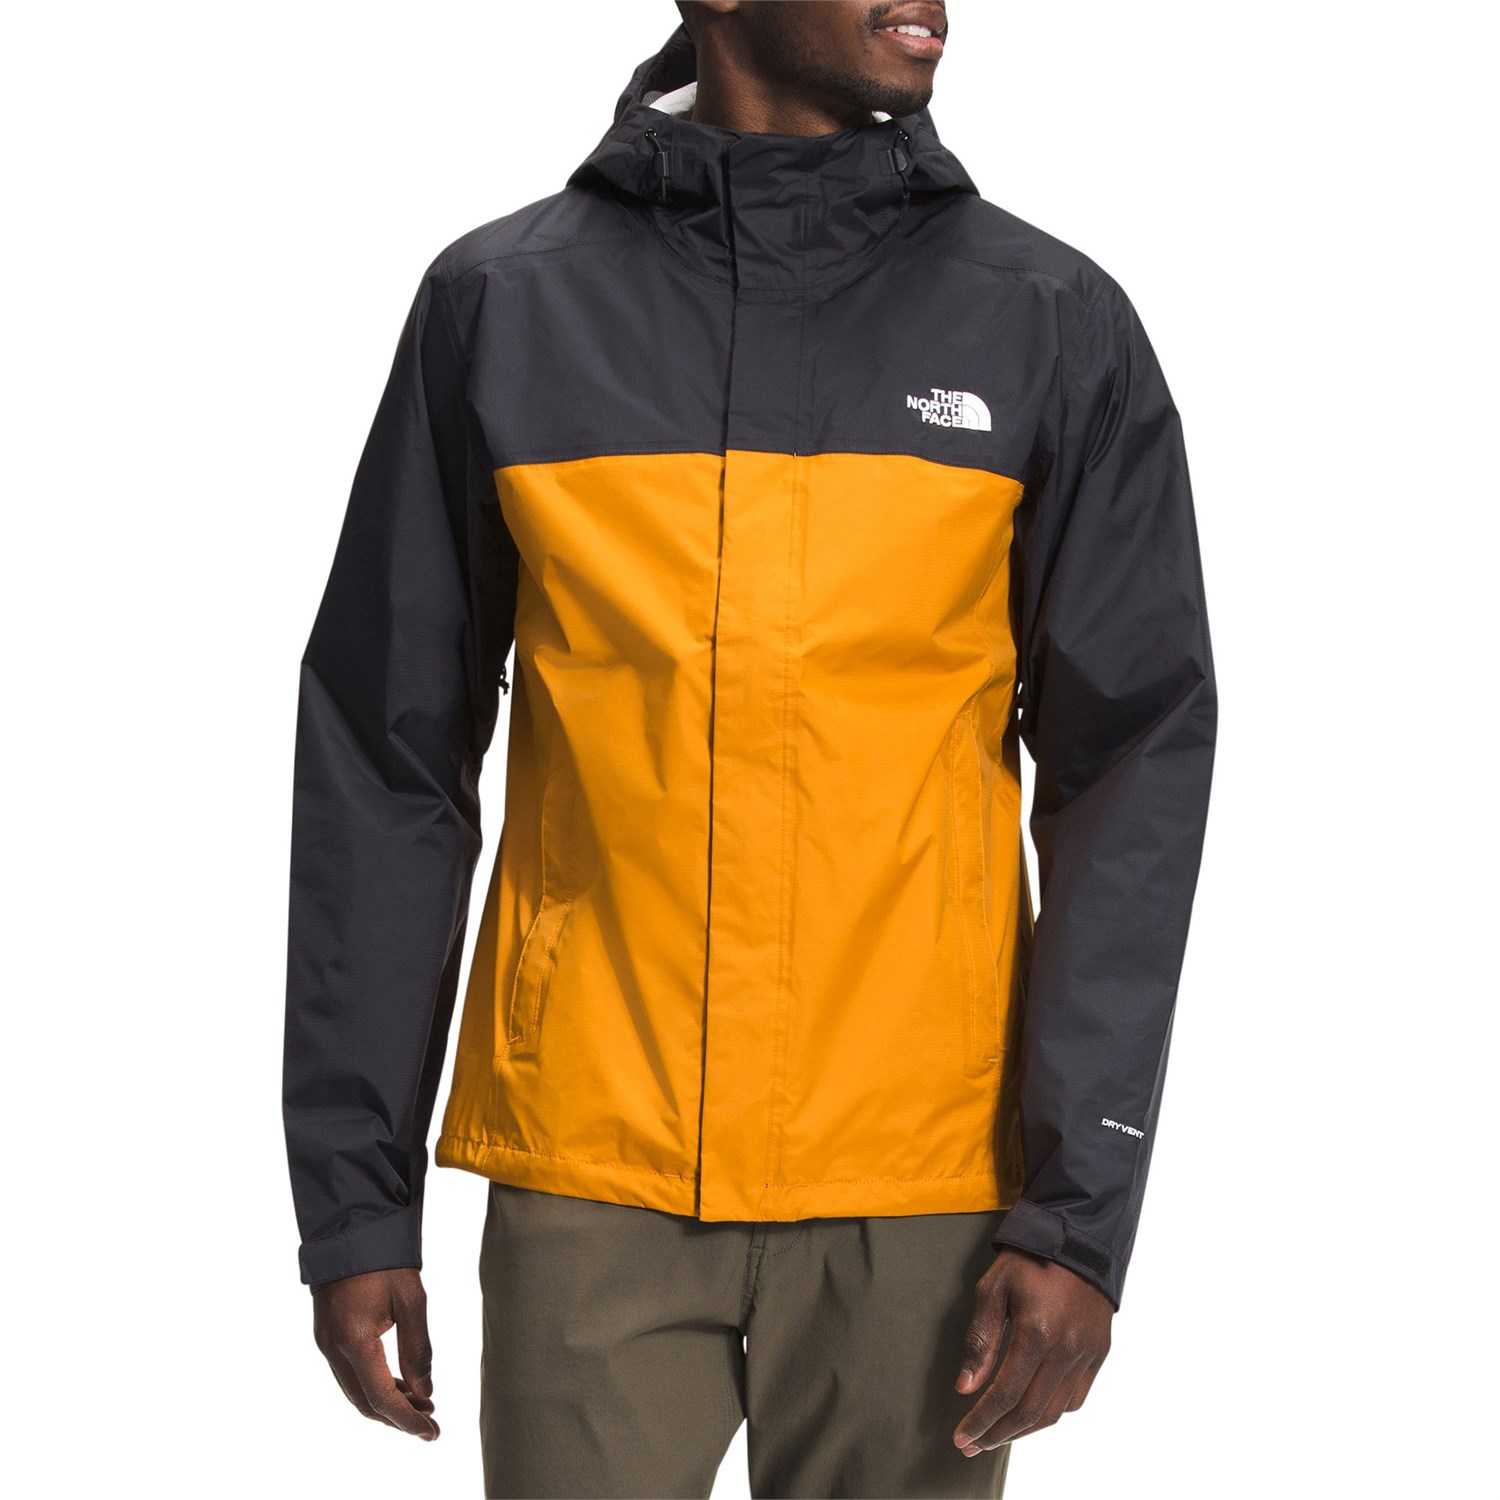 The North Face Venture 2 Jacket | evo